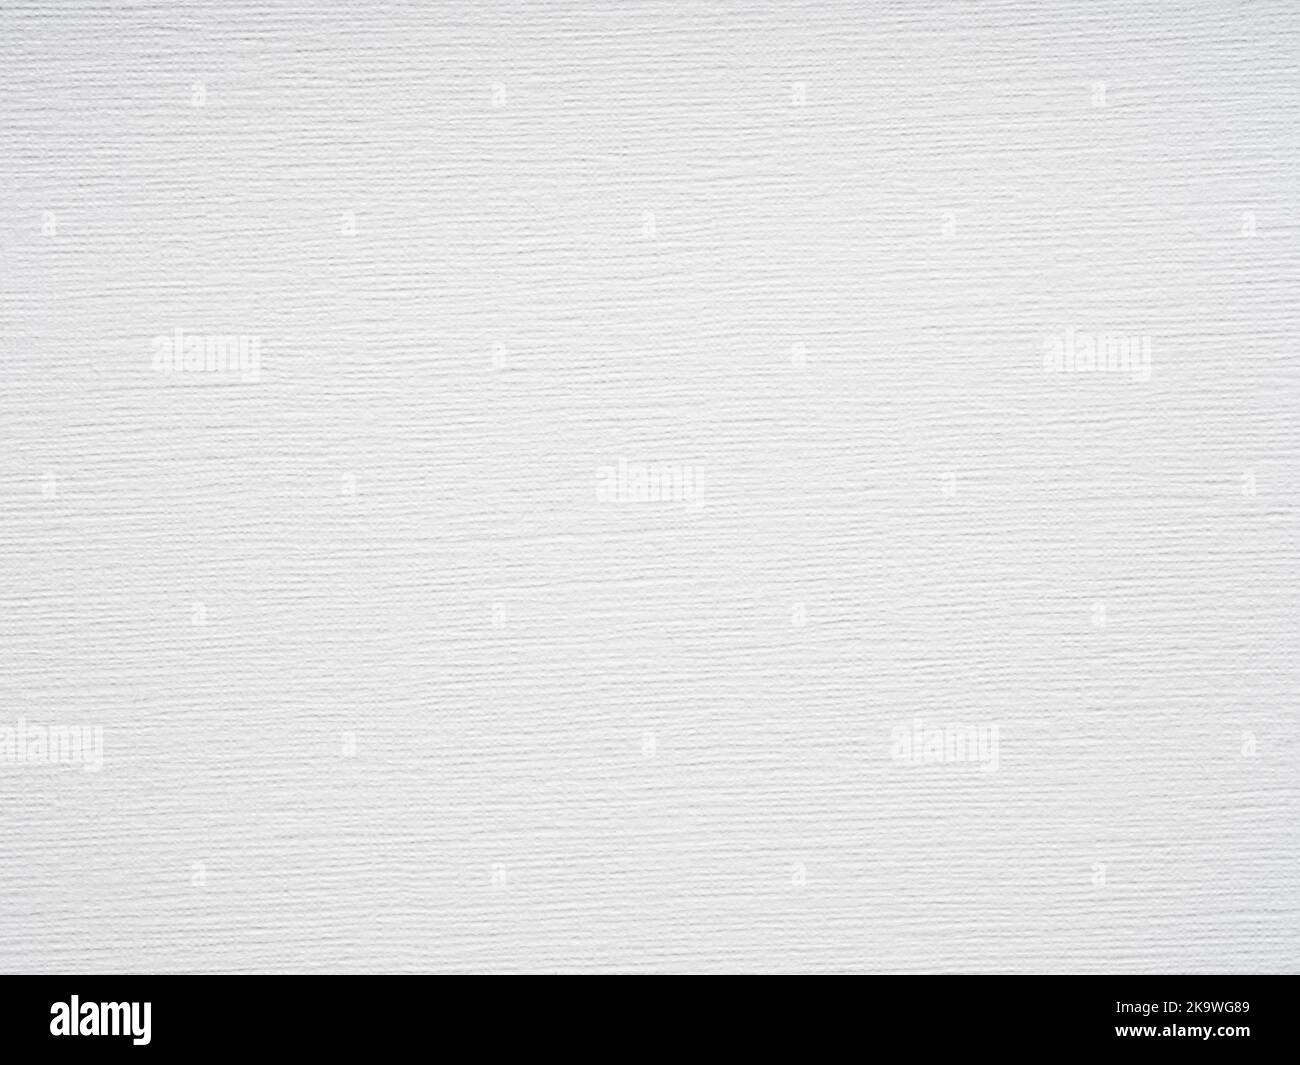 Clean Black and Whitetunnel Corridor with Glowing Lights 3d Illustration  Background Wallpaper Stock Illustration  Illustration of reflect windows  164344128